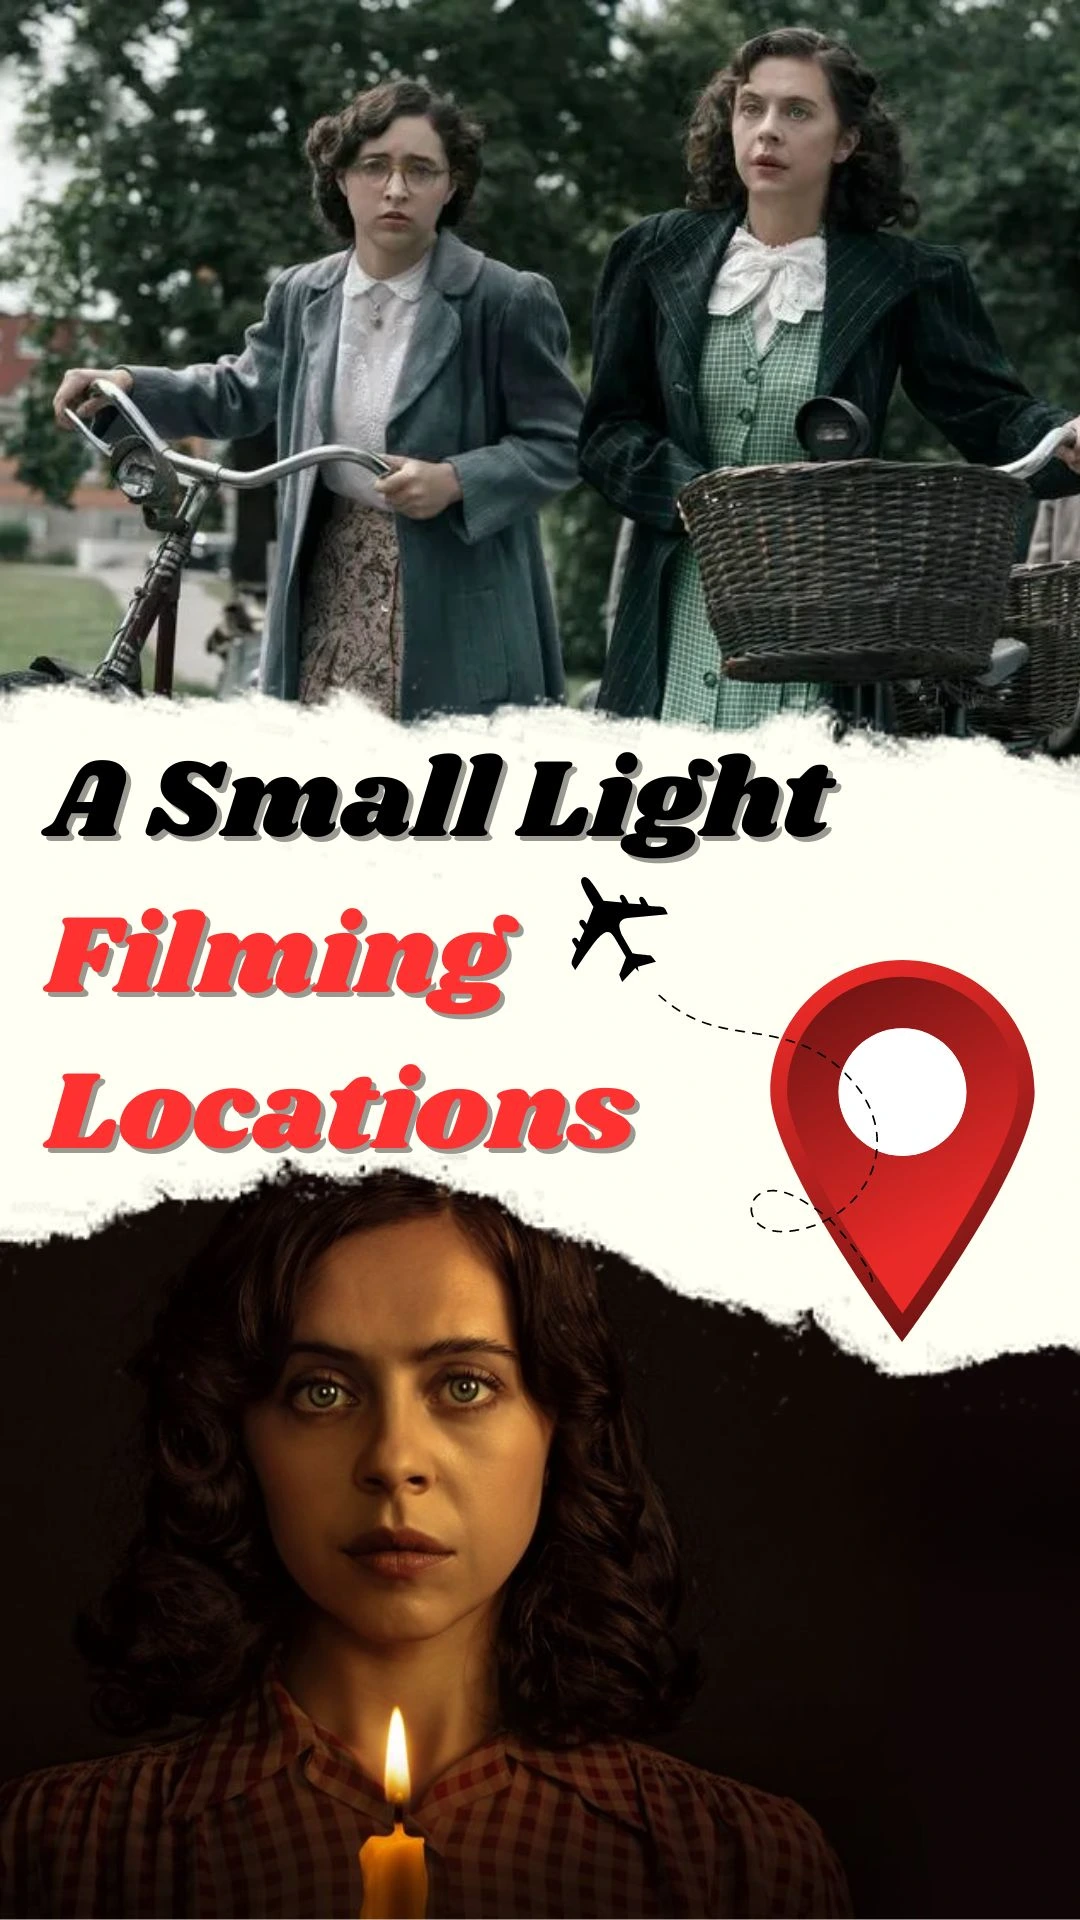 A Small Light Filming Locations